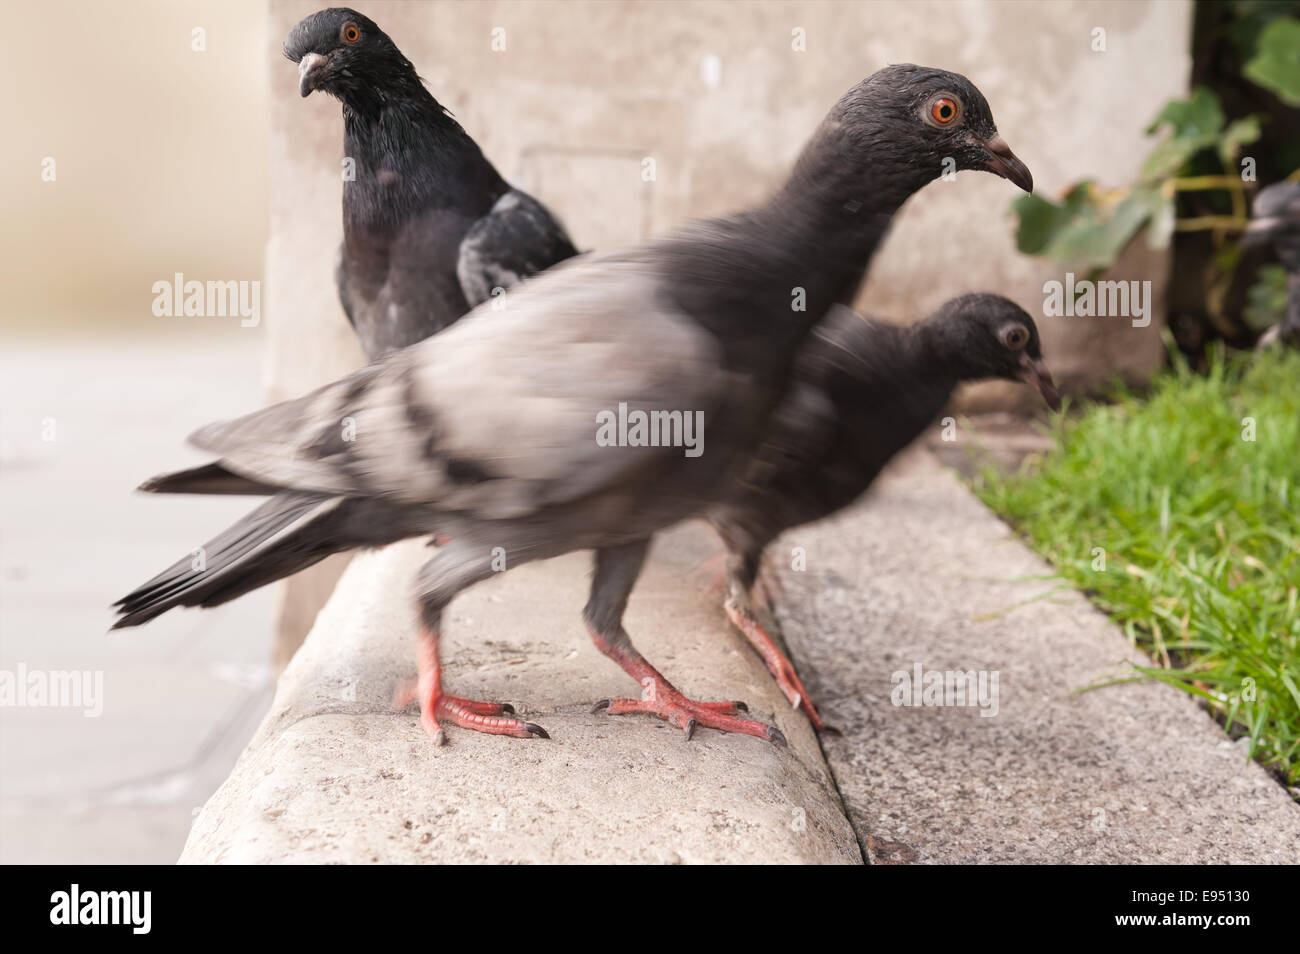 Inquisitive pigeons staring and moving past on a granite portland stone wall Stock Photo